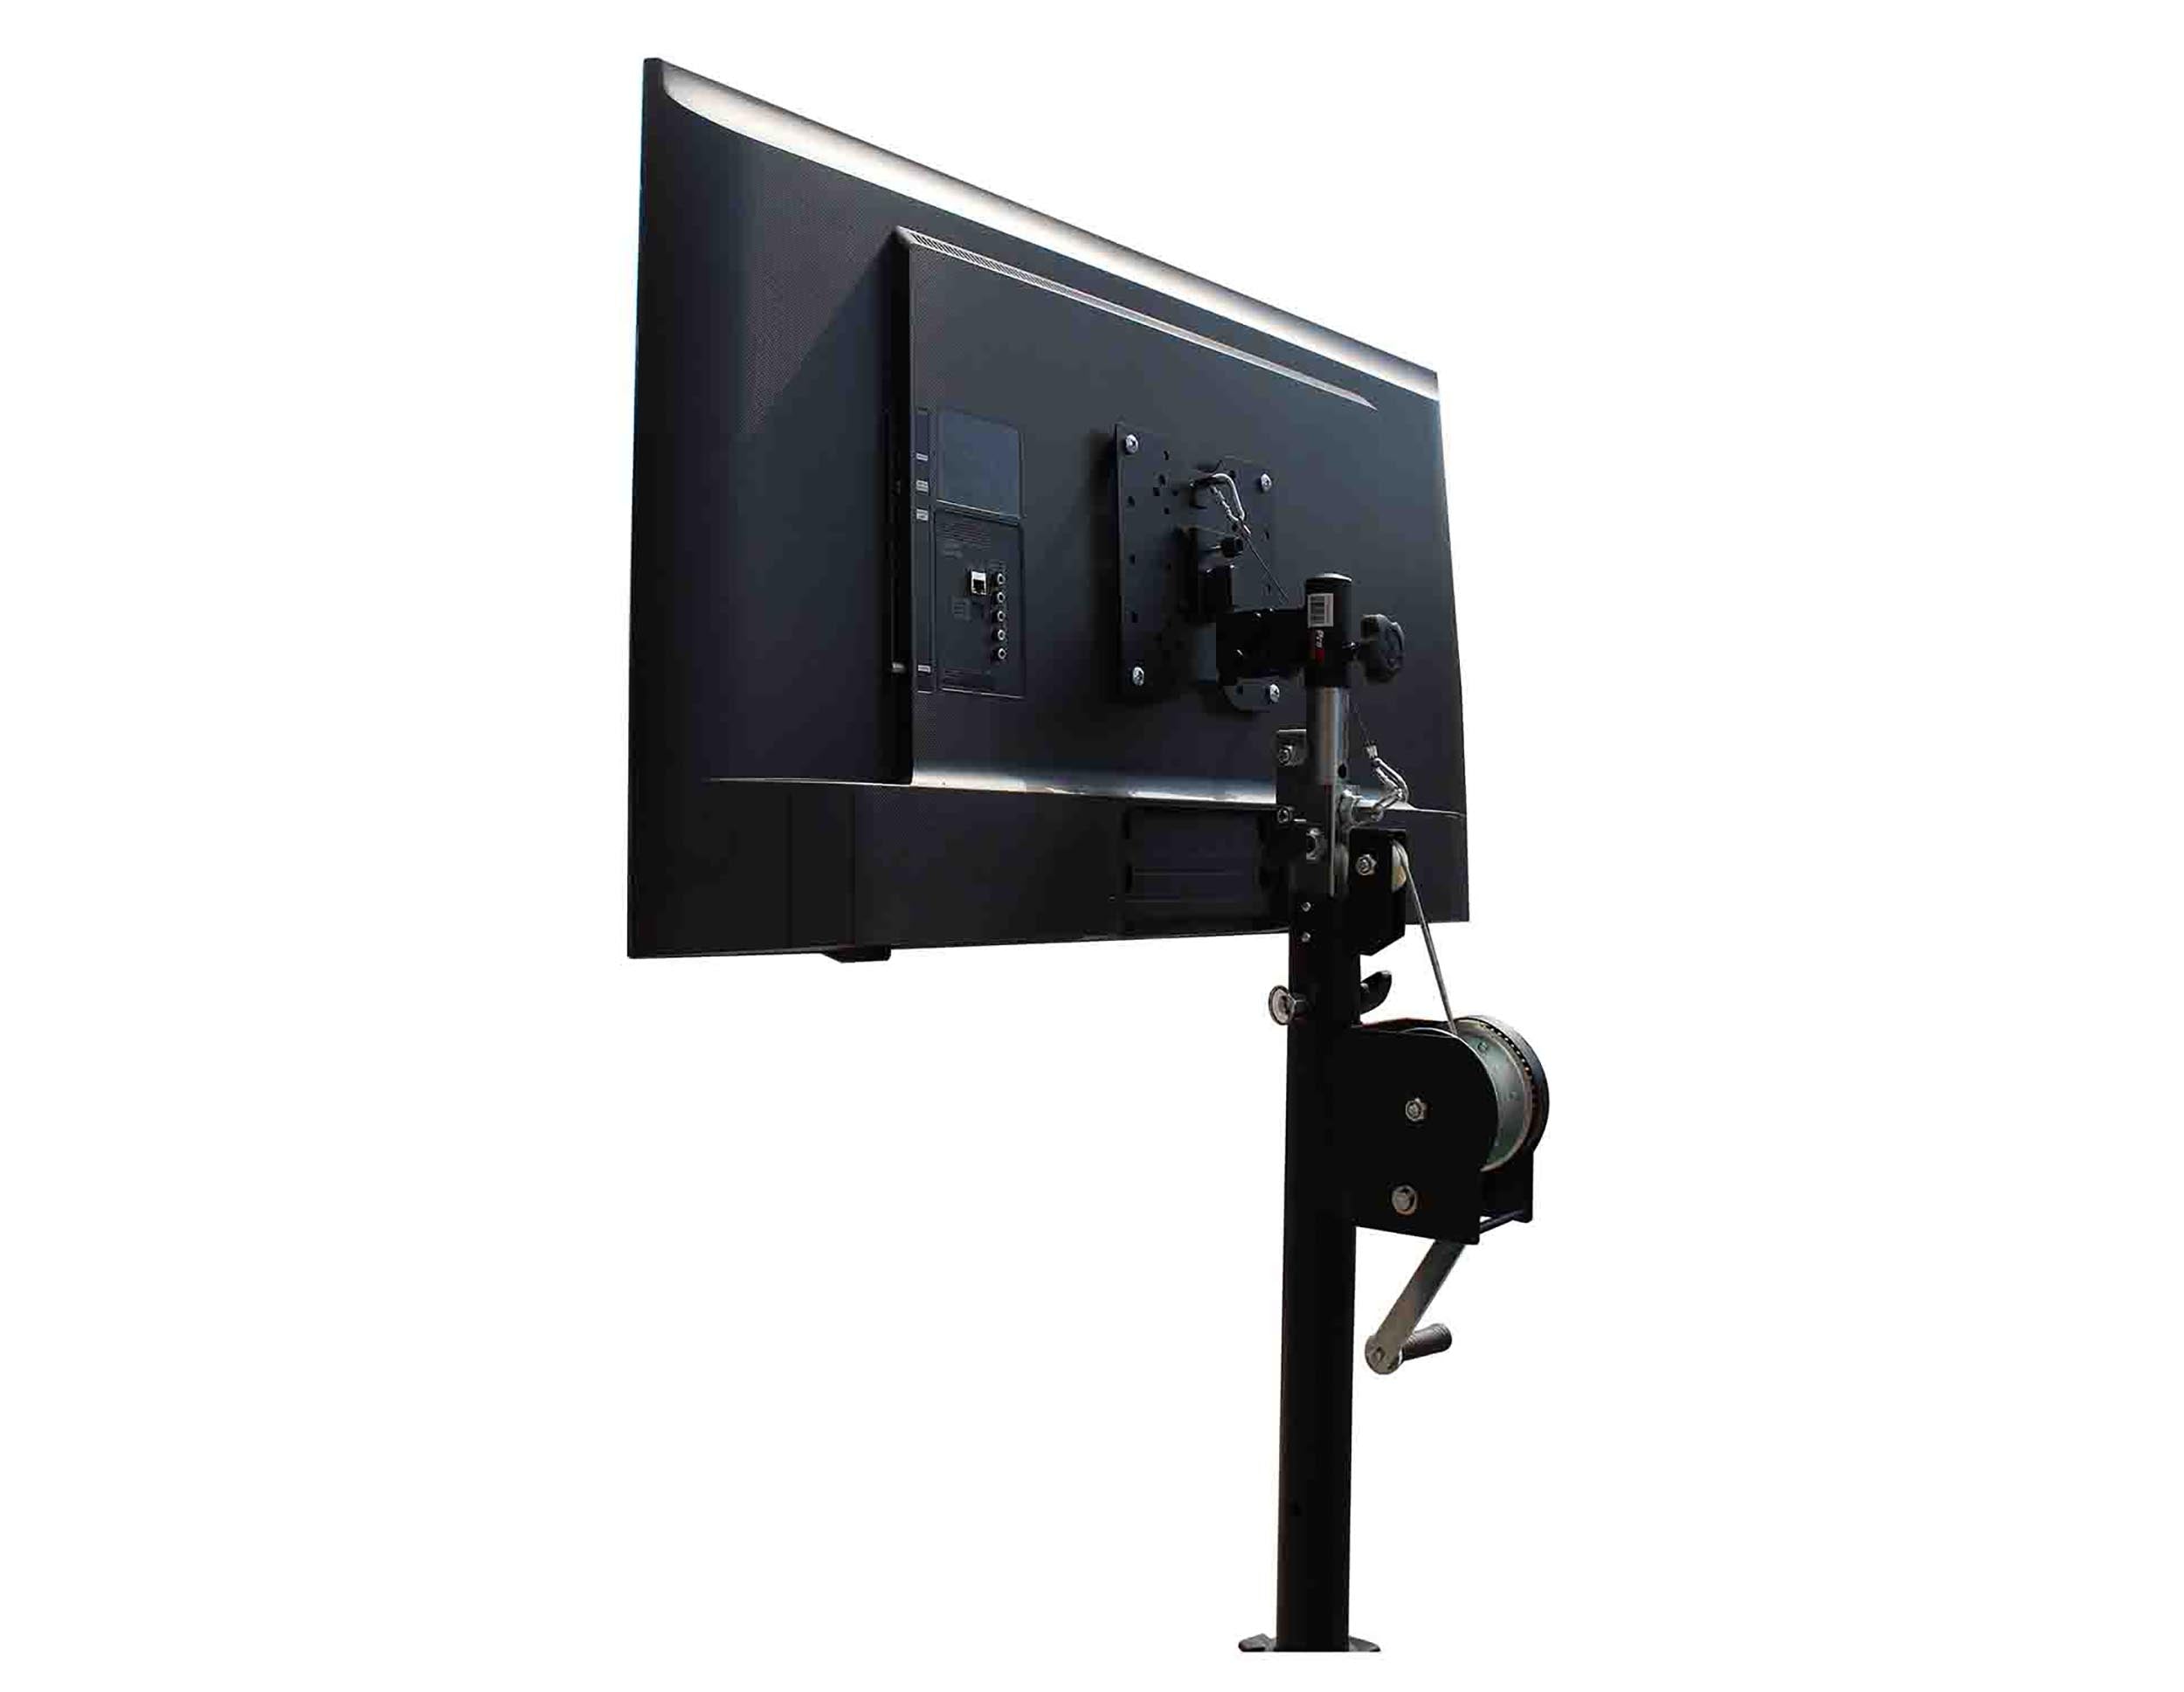 ProX XT-MEDIAMOUNT Universal 32" to 80" TV Bracket Clamp with Vesa Mount for F34 F32 and 12" Bolt Truss or Speaker Stands by ProX Cases